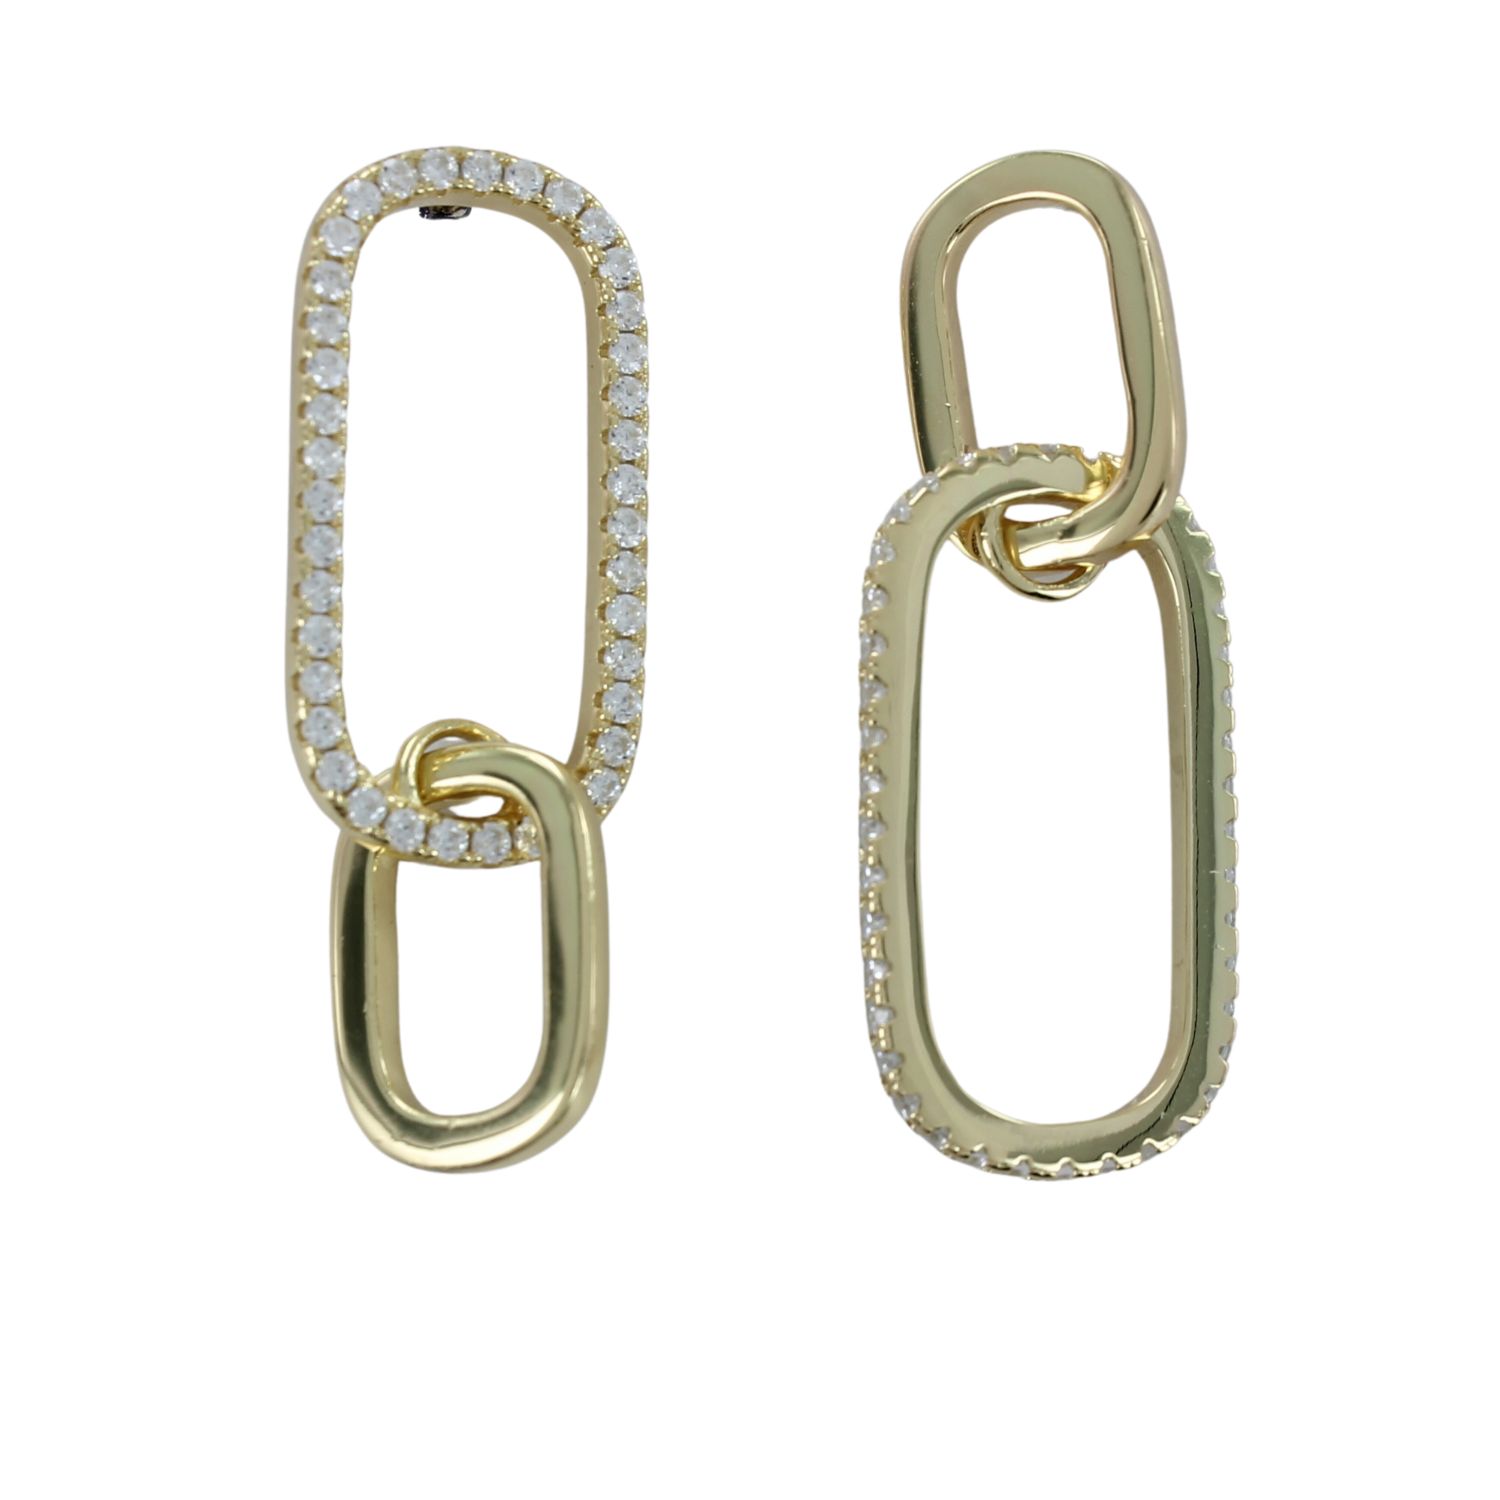 Reeves & Reeves Women's Silver Sparkly Gold Plate Paperclip Earrings